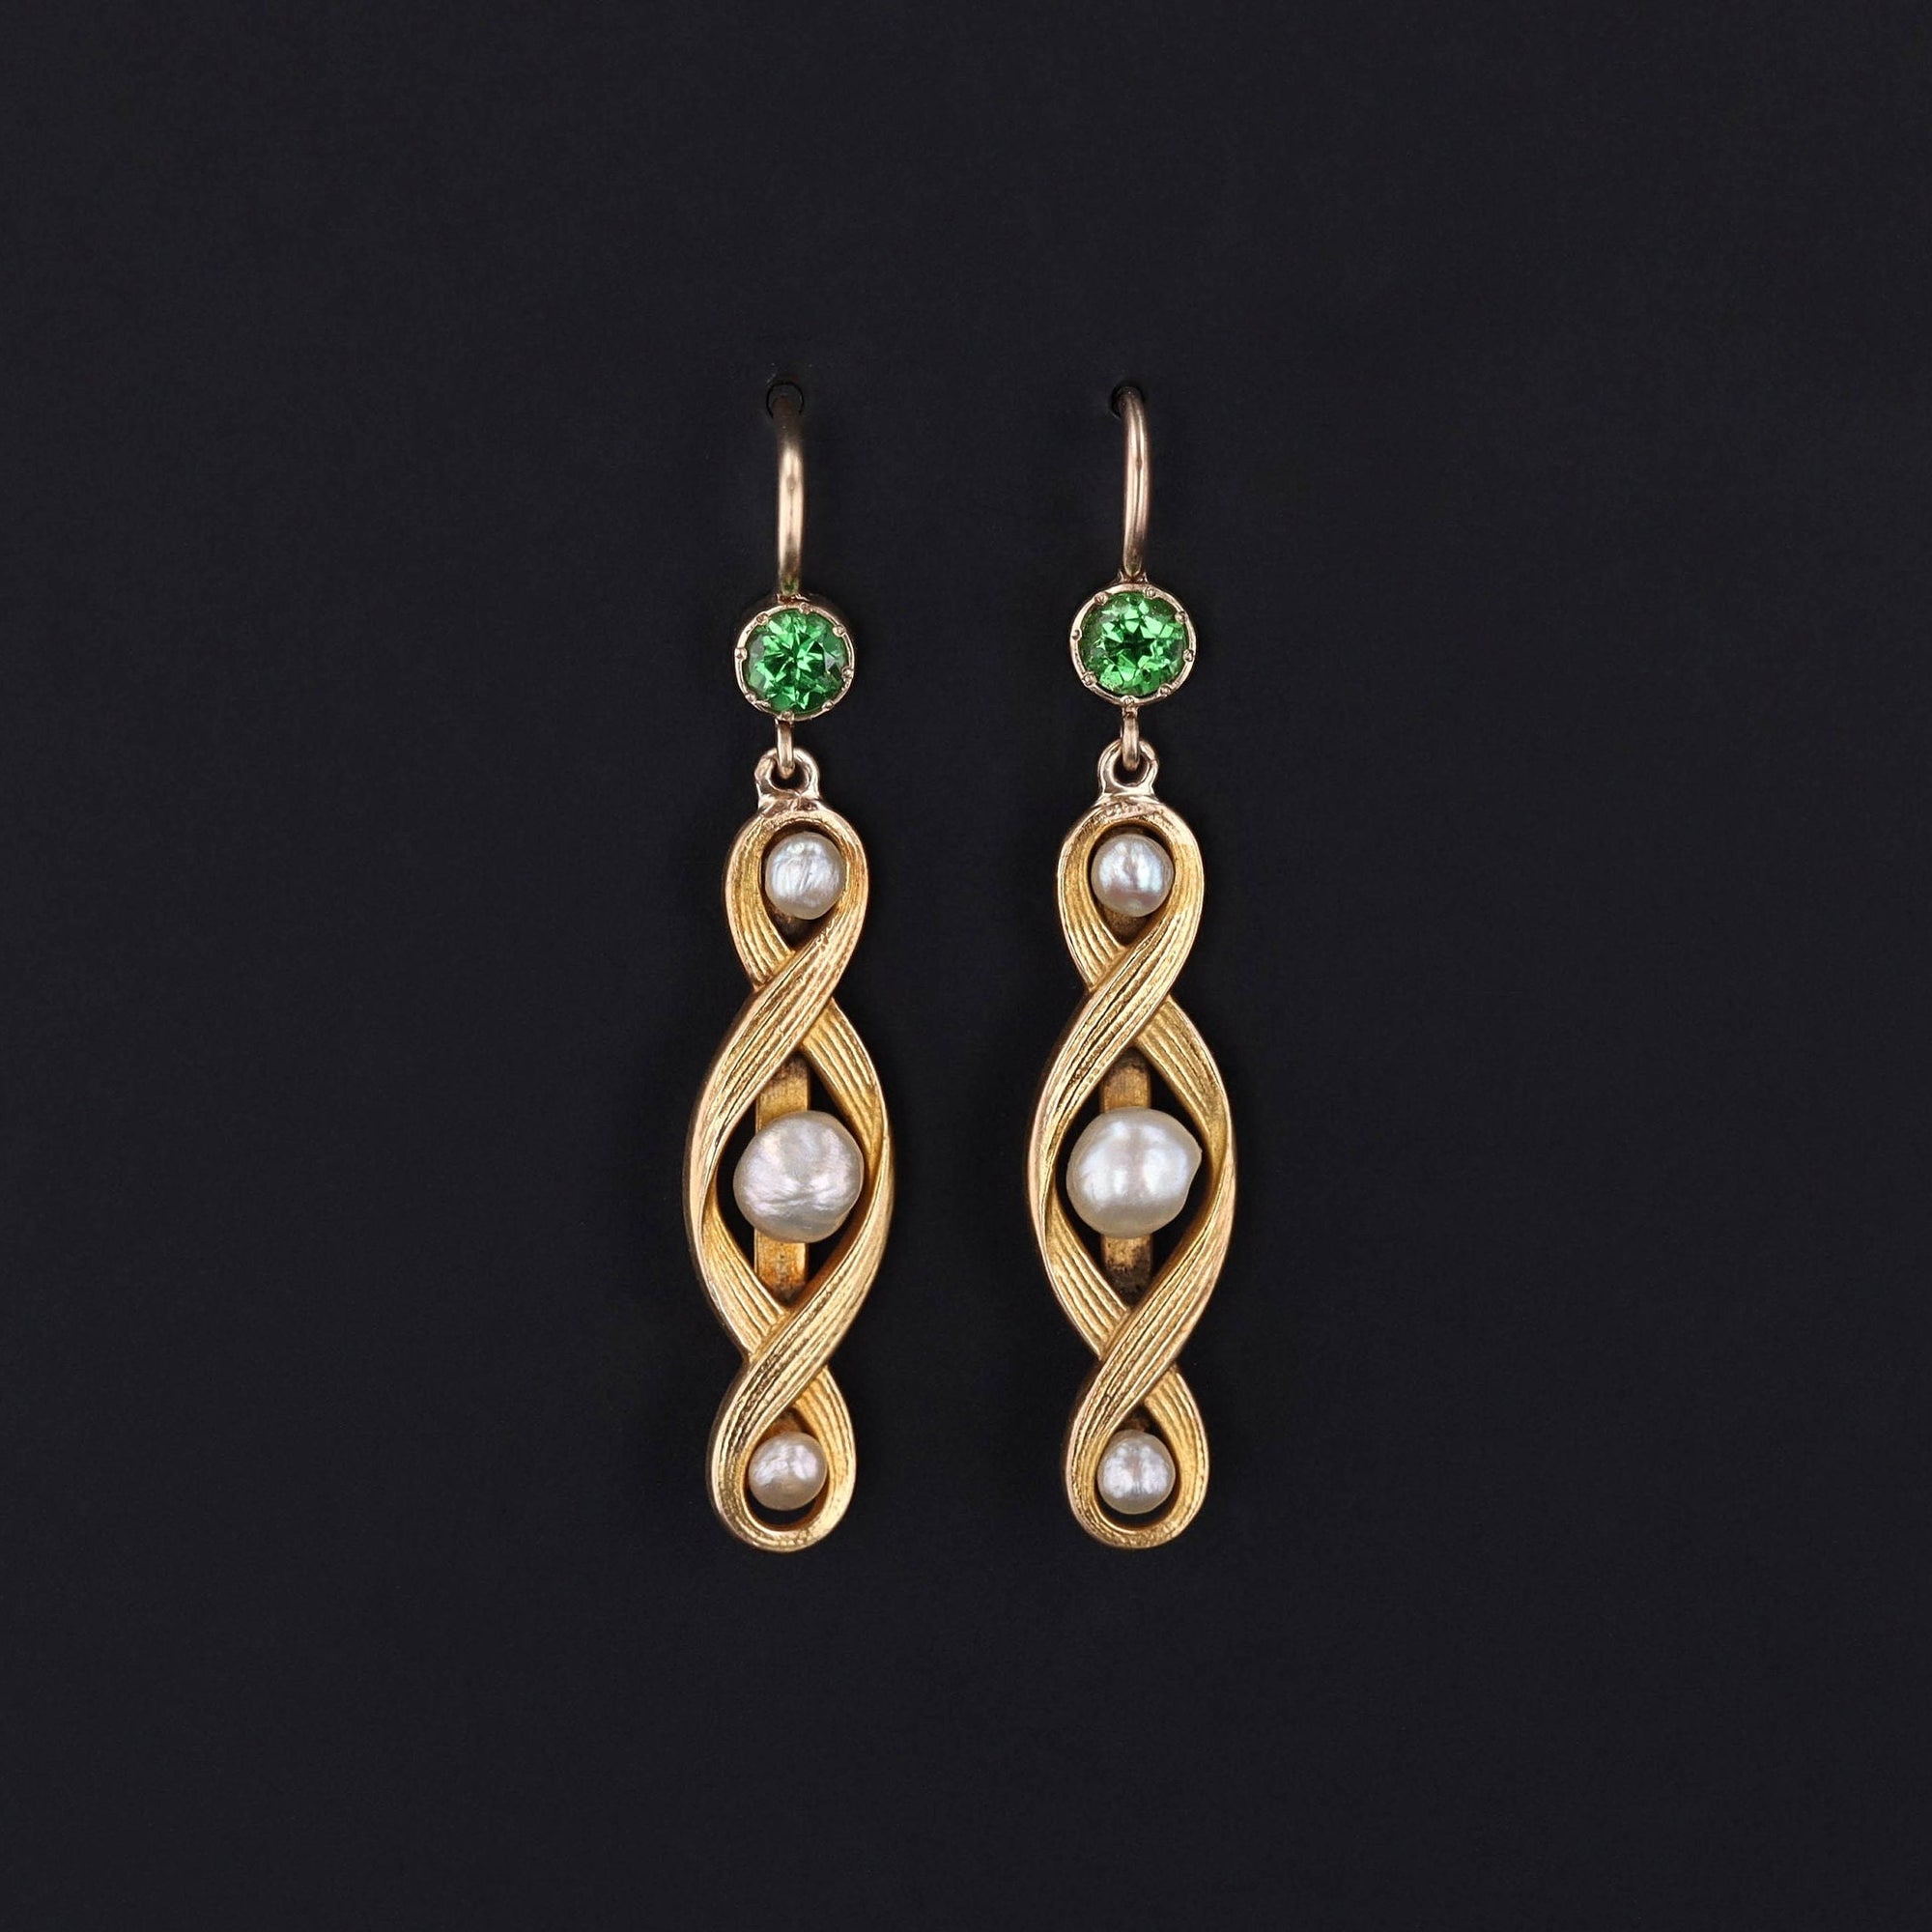 Antique Bar Pin Earrings with Pearls and Tsavorite Garnets